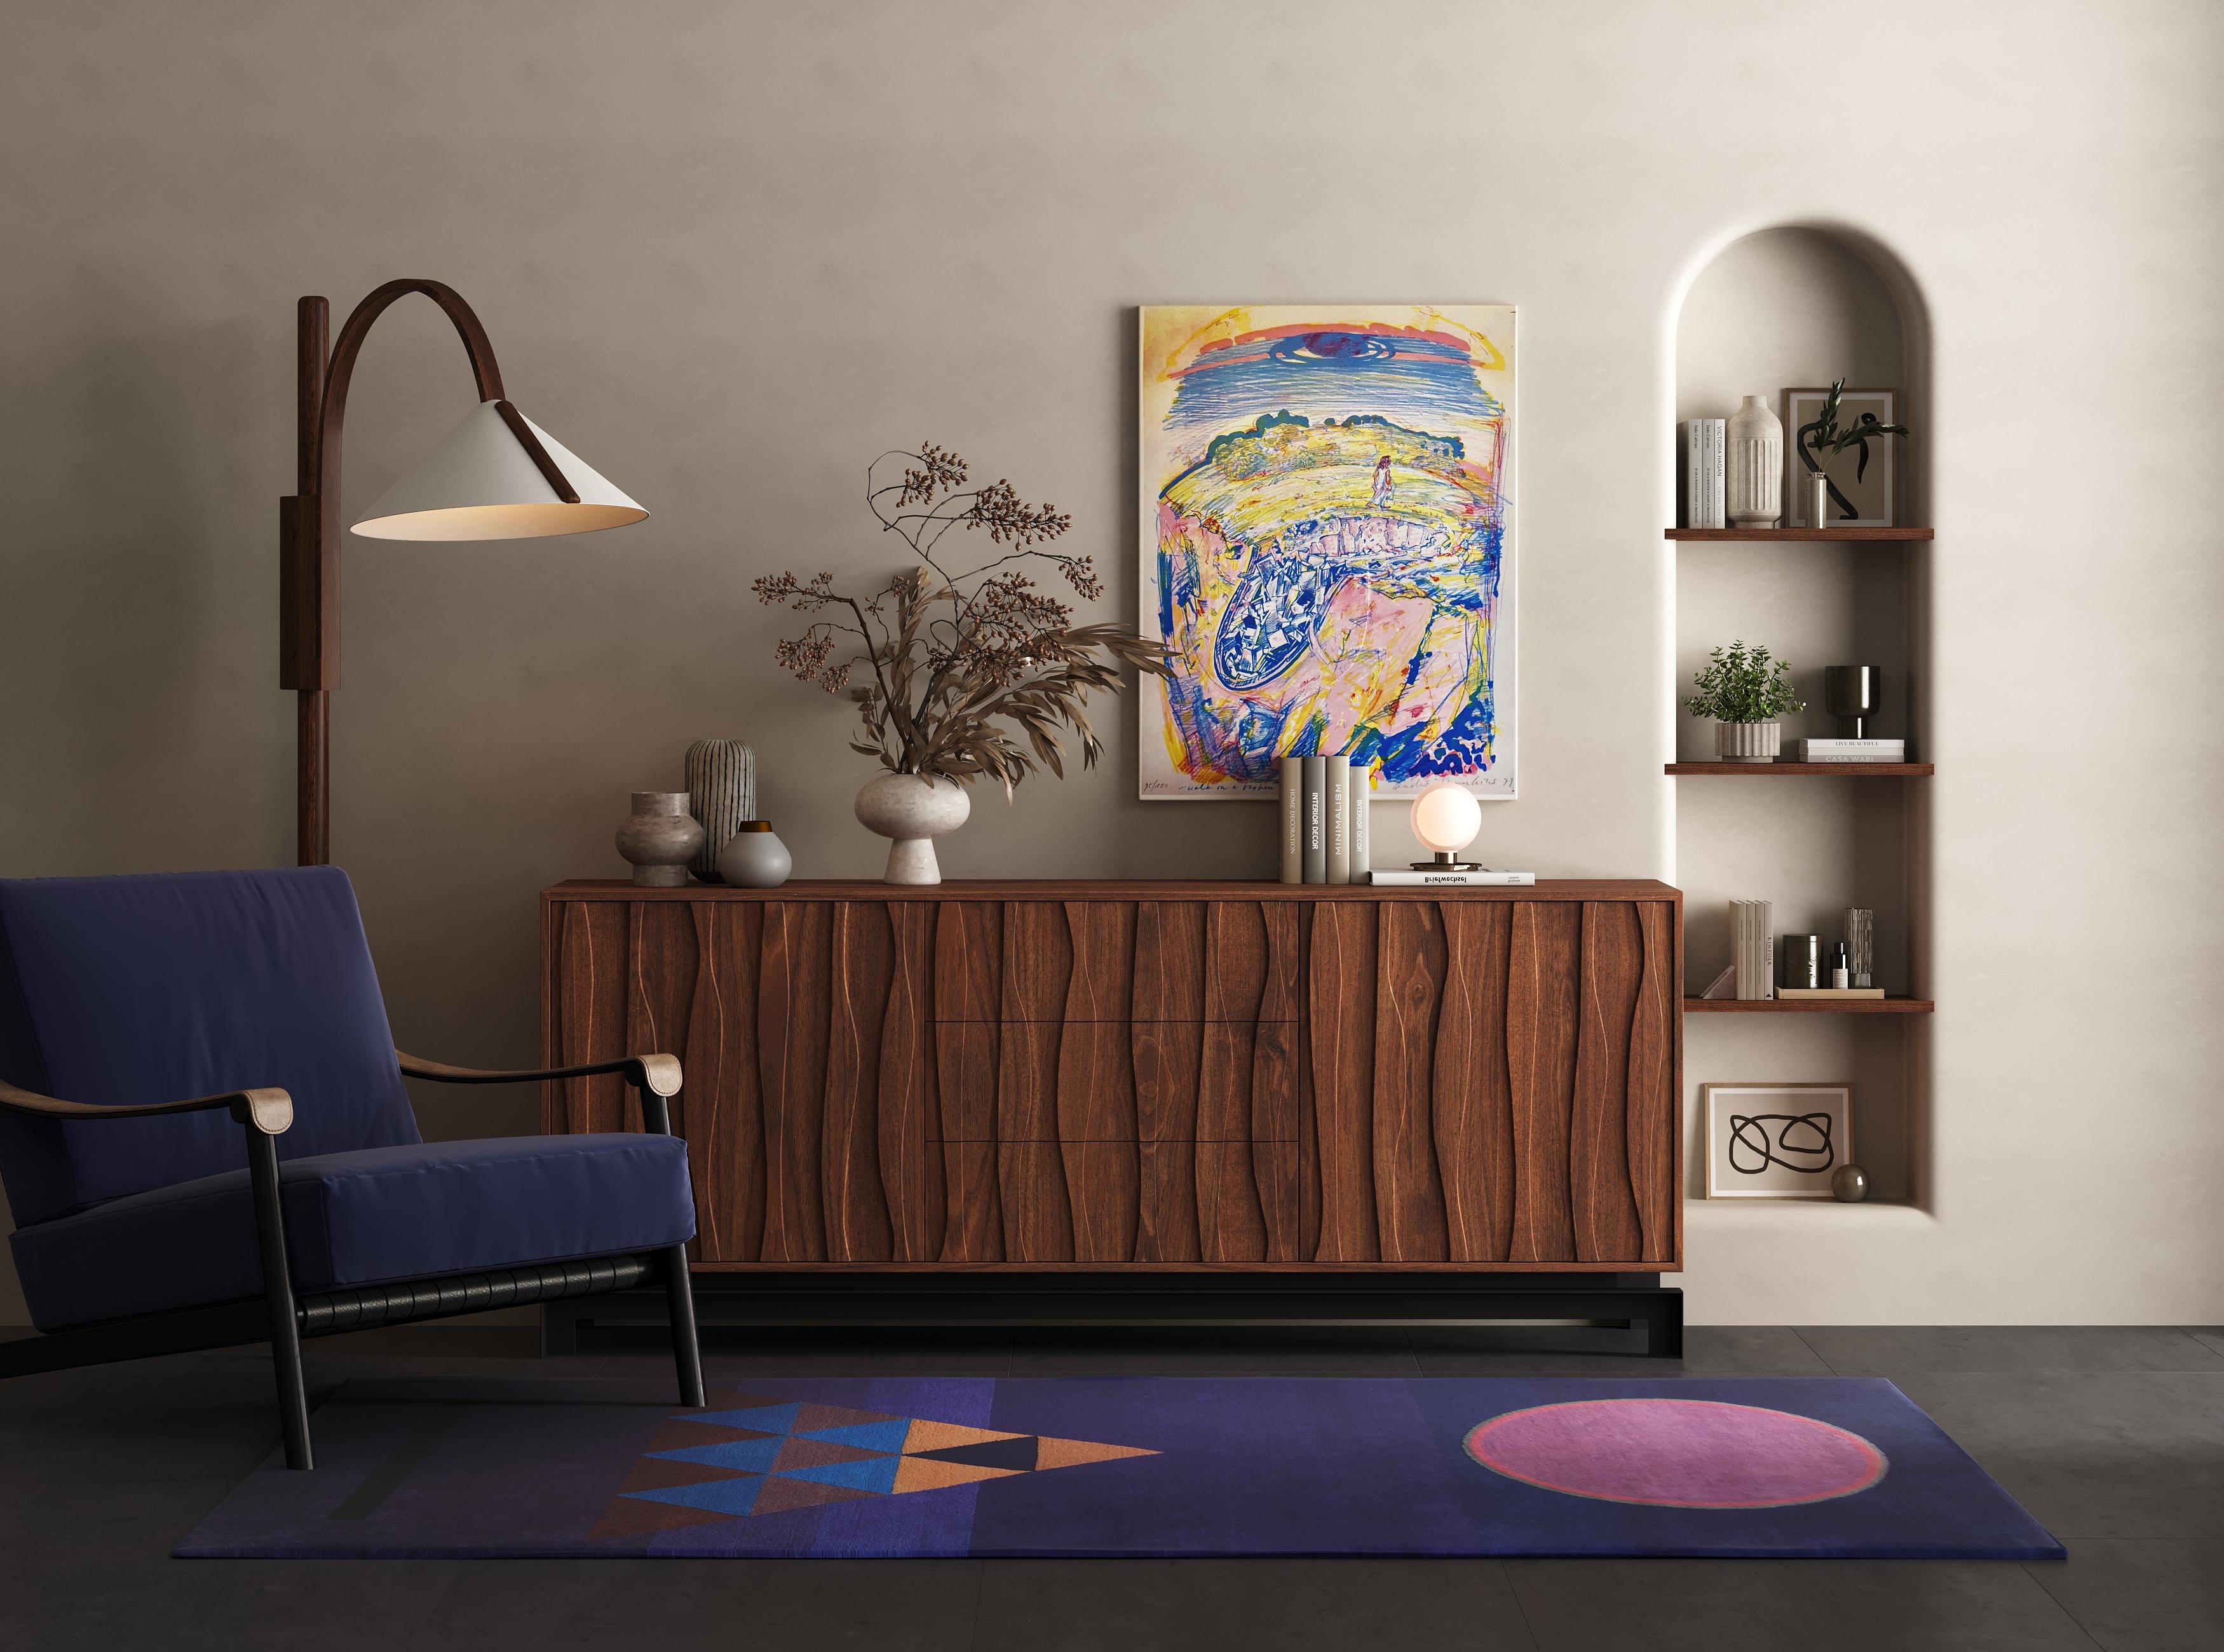 Custom hand knotted runner rug based on the painting “Conclusion” by Bauhaus master painter Wassily Kandinsky (original German title “Schluss”). The original proportions of the painting are carefully respected and they make this carpet ideal for a